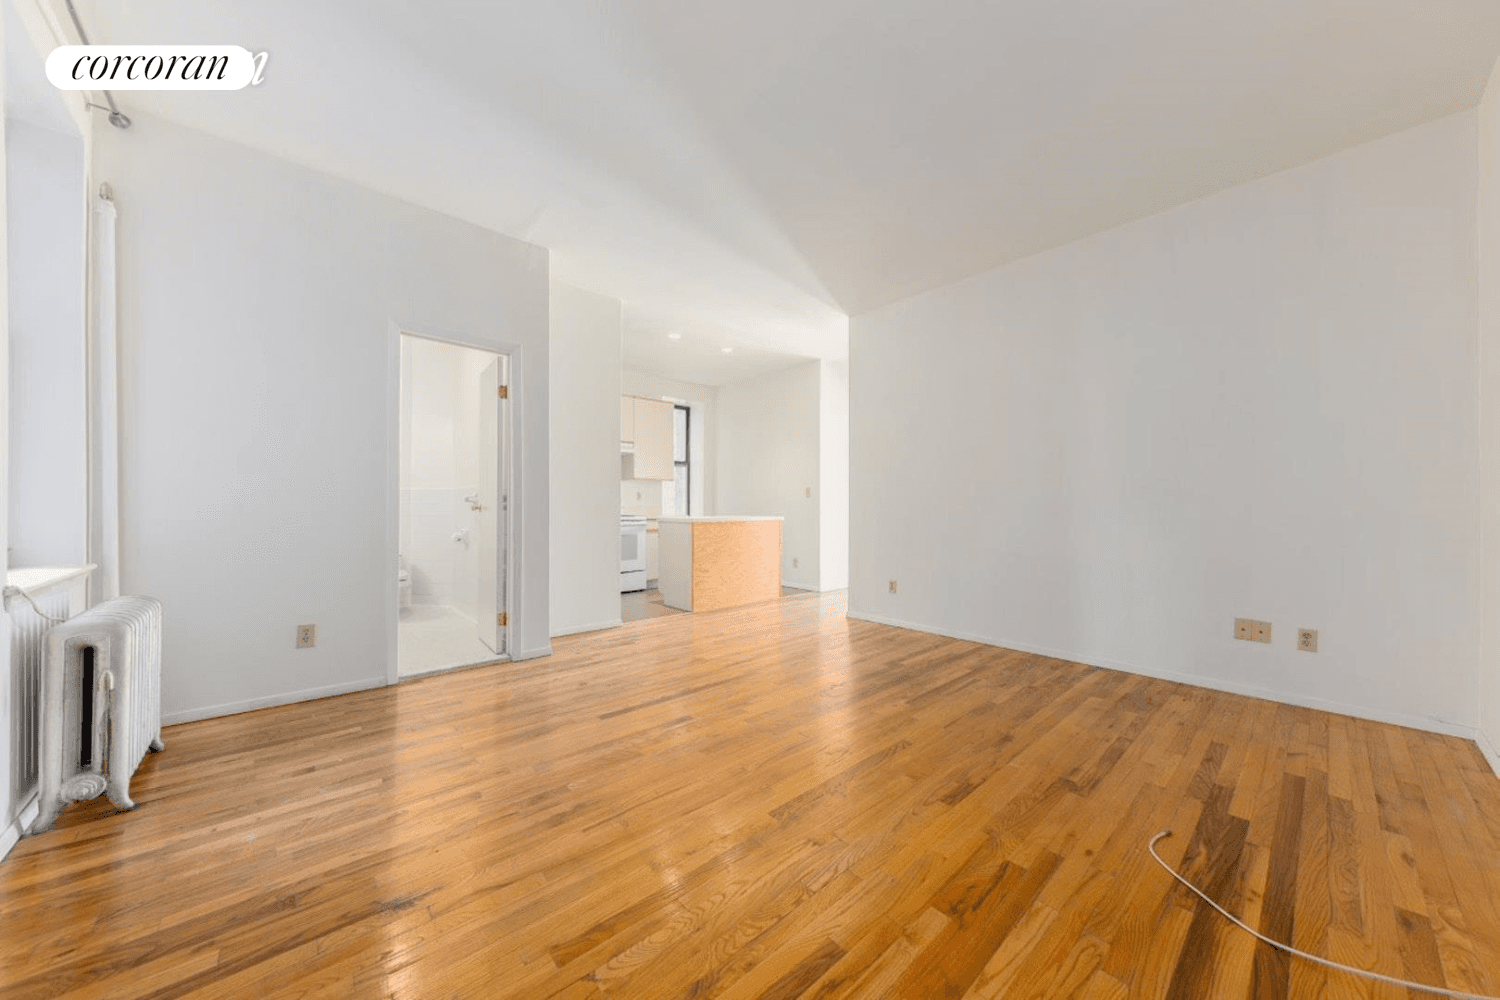 This extra large 2 beds, 1 bath unit features a beautiful open layout floorplan with generous living space, designated dining area, massive kitchen with ample cabinet space and central Island, ...